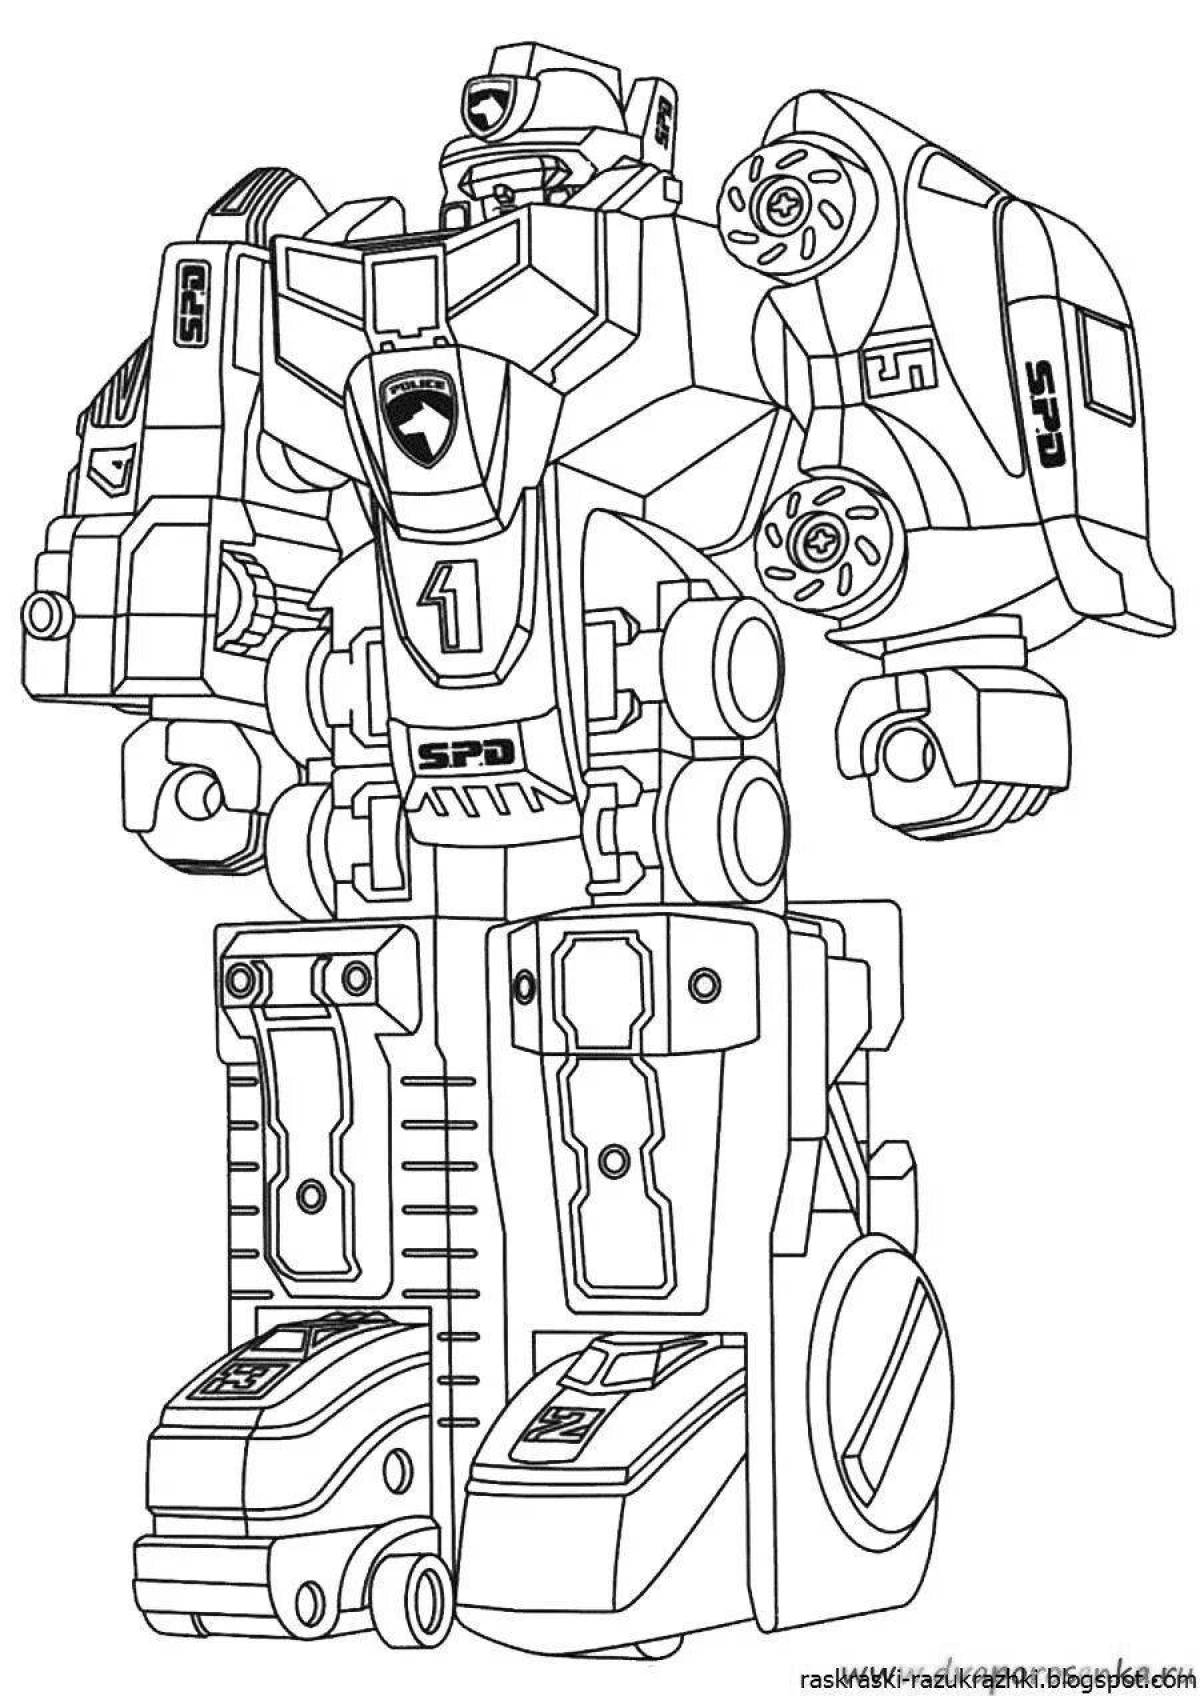 Amazing complex robot coloring book